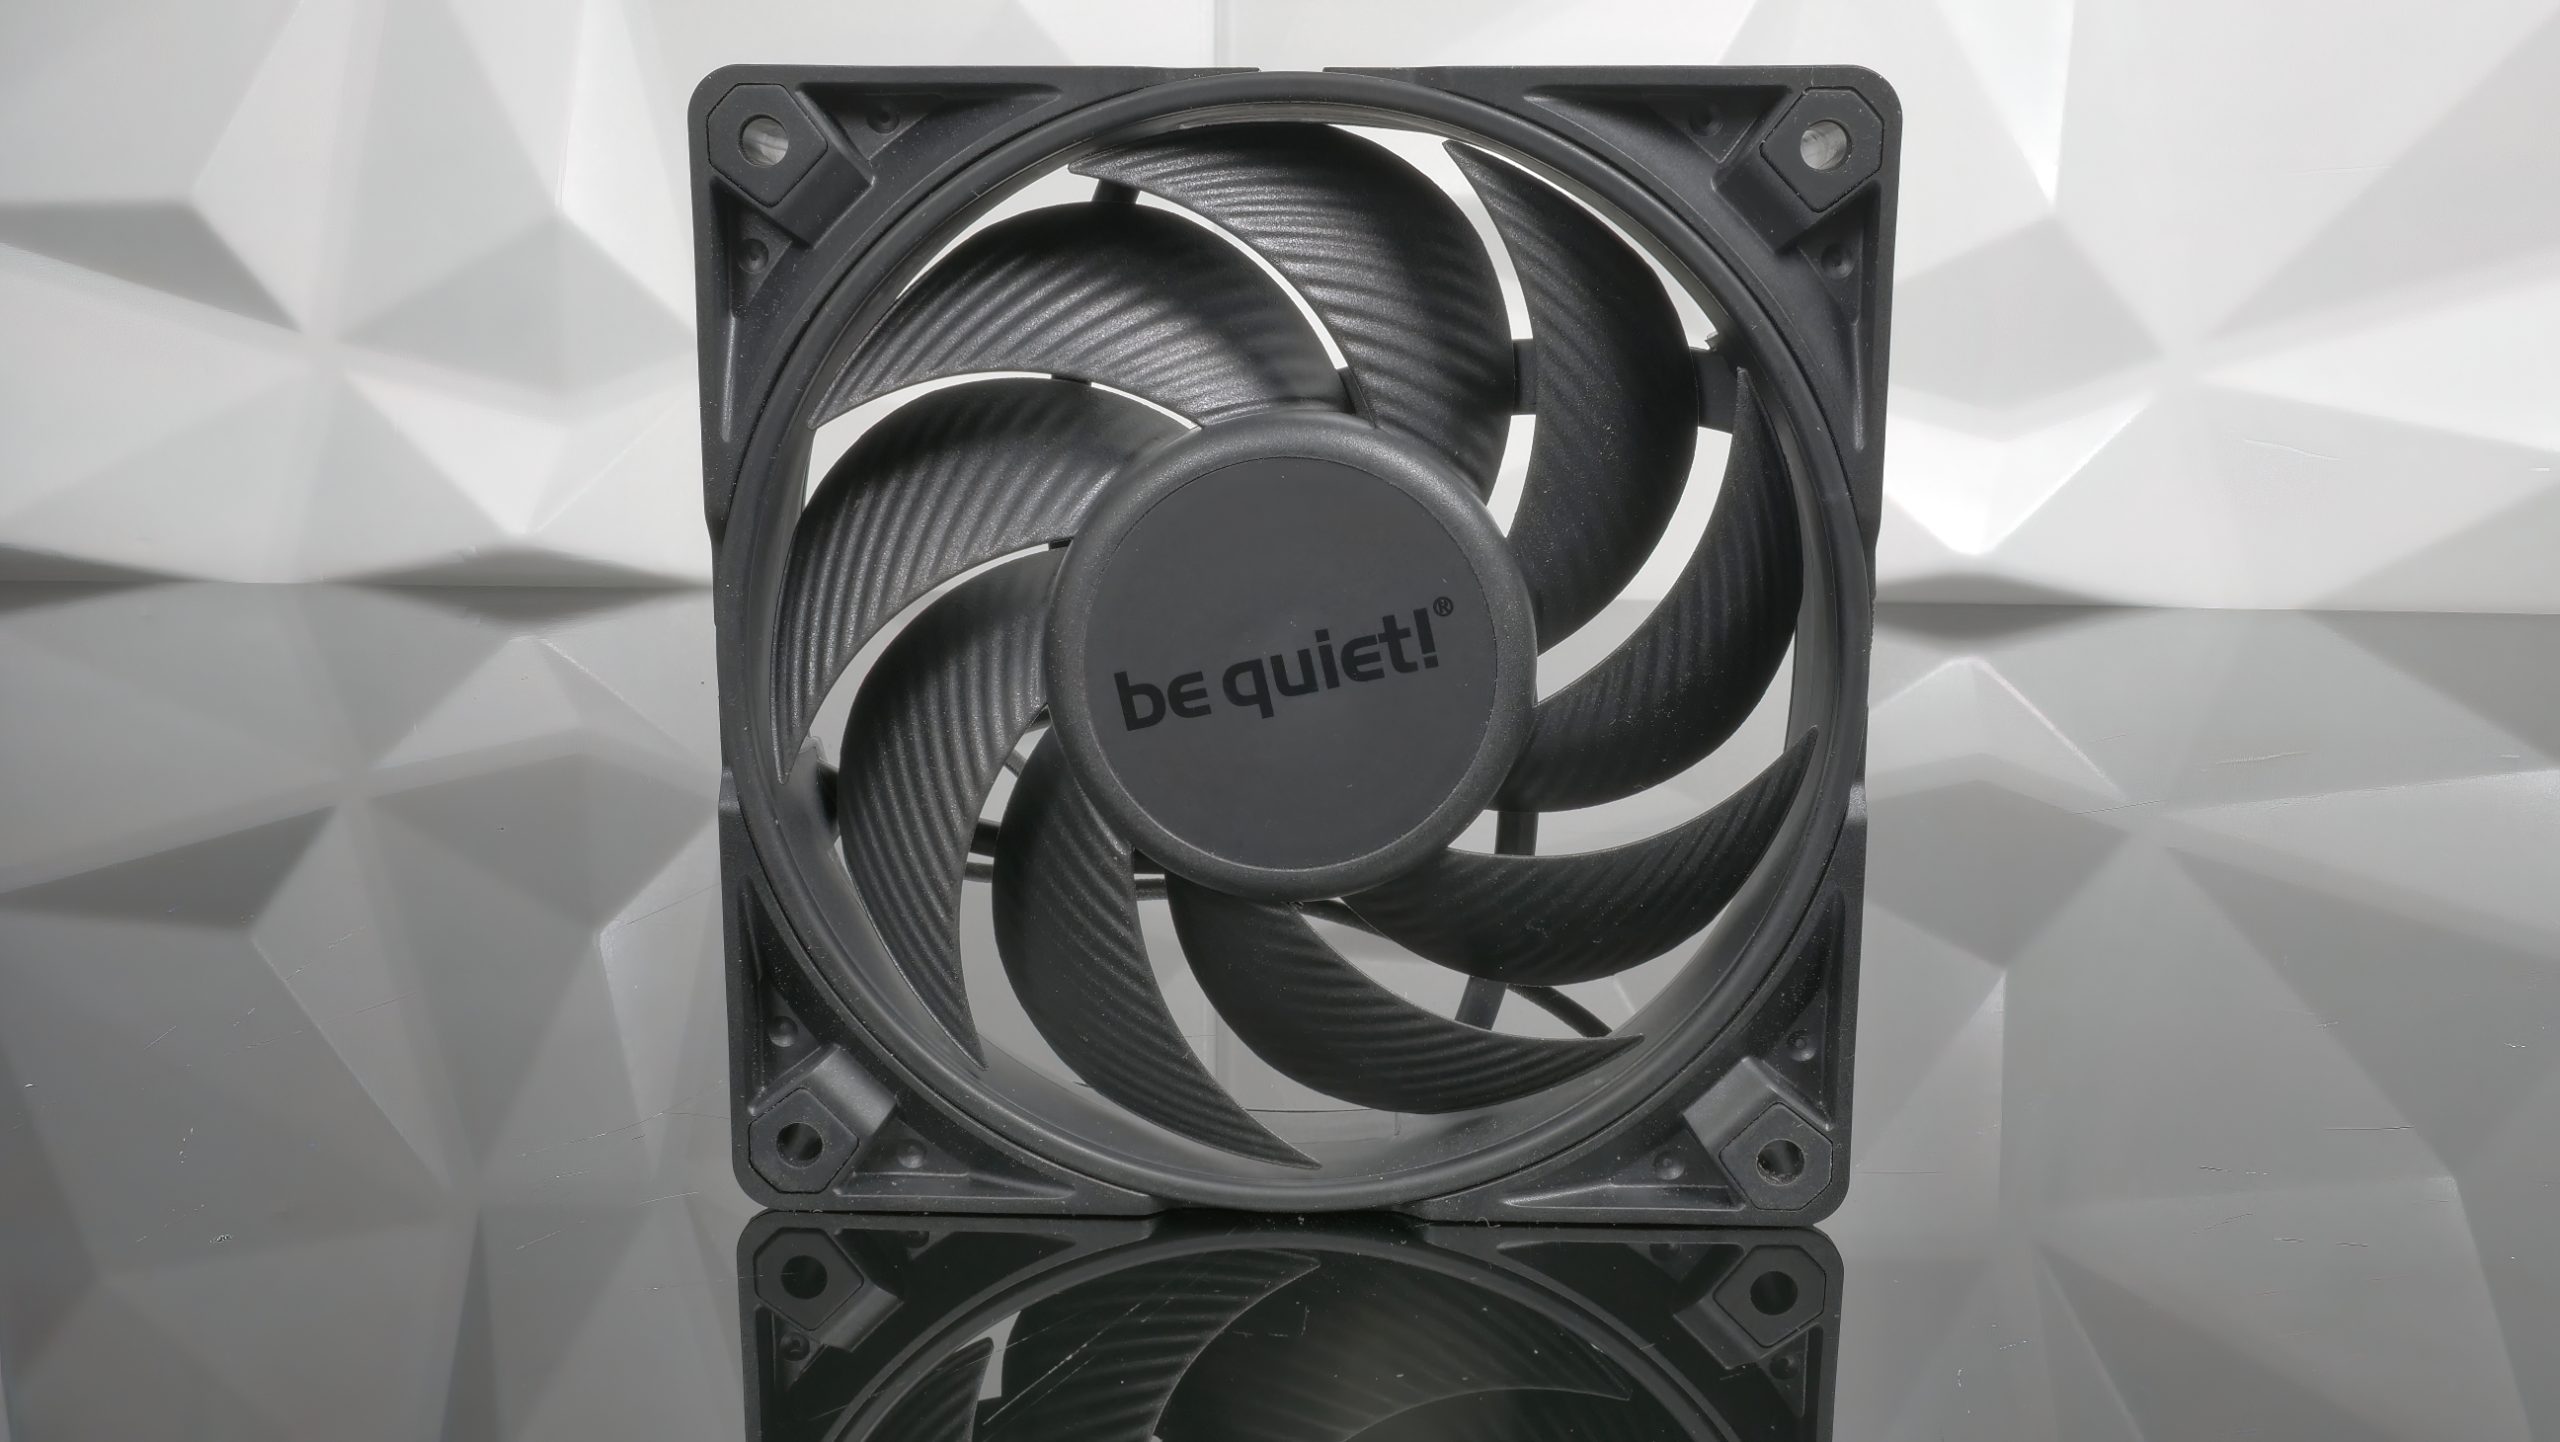 all the 120 be - Silent When Review mm says igor´sLAB it 4 Fan Wings 1 | Part (Pro) | name quiet! Case